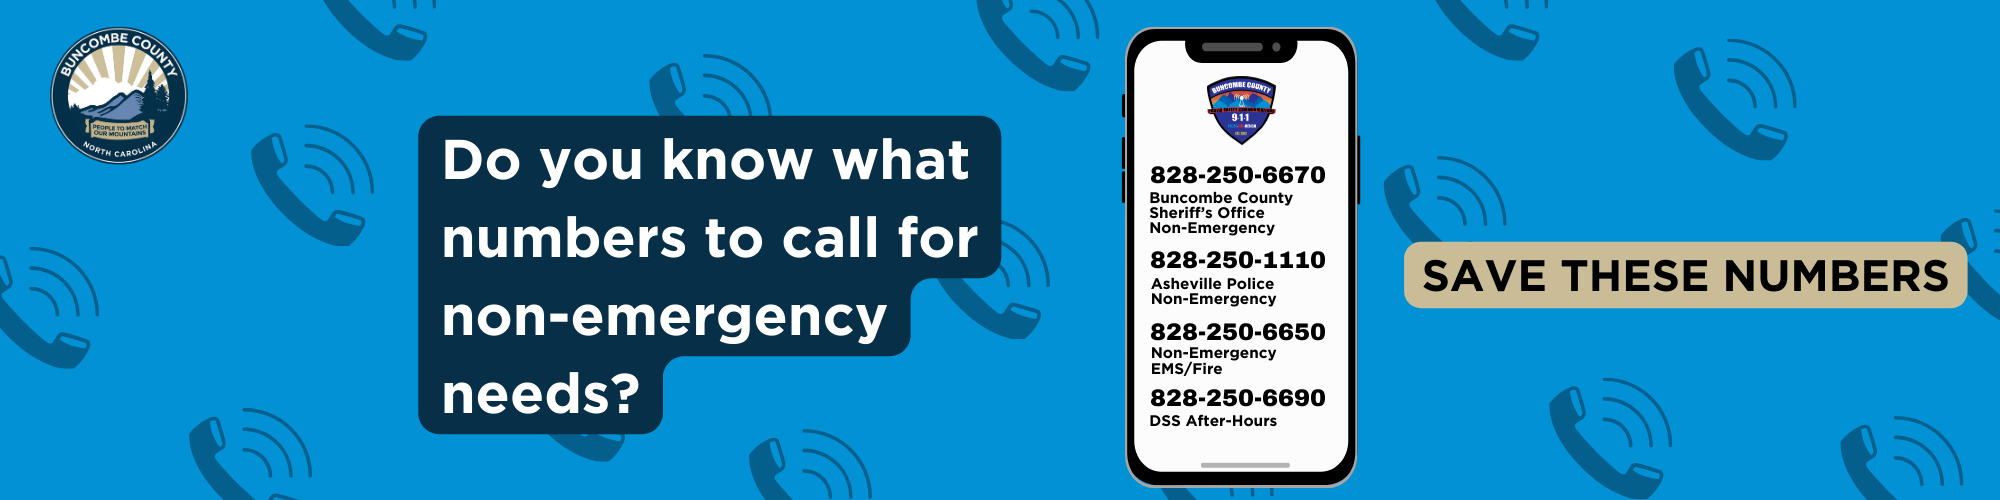 Image of phone with non-emergency numbers